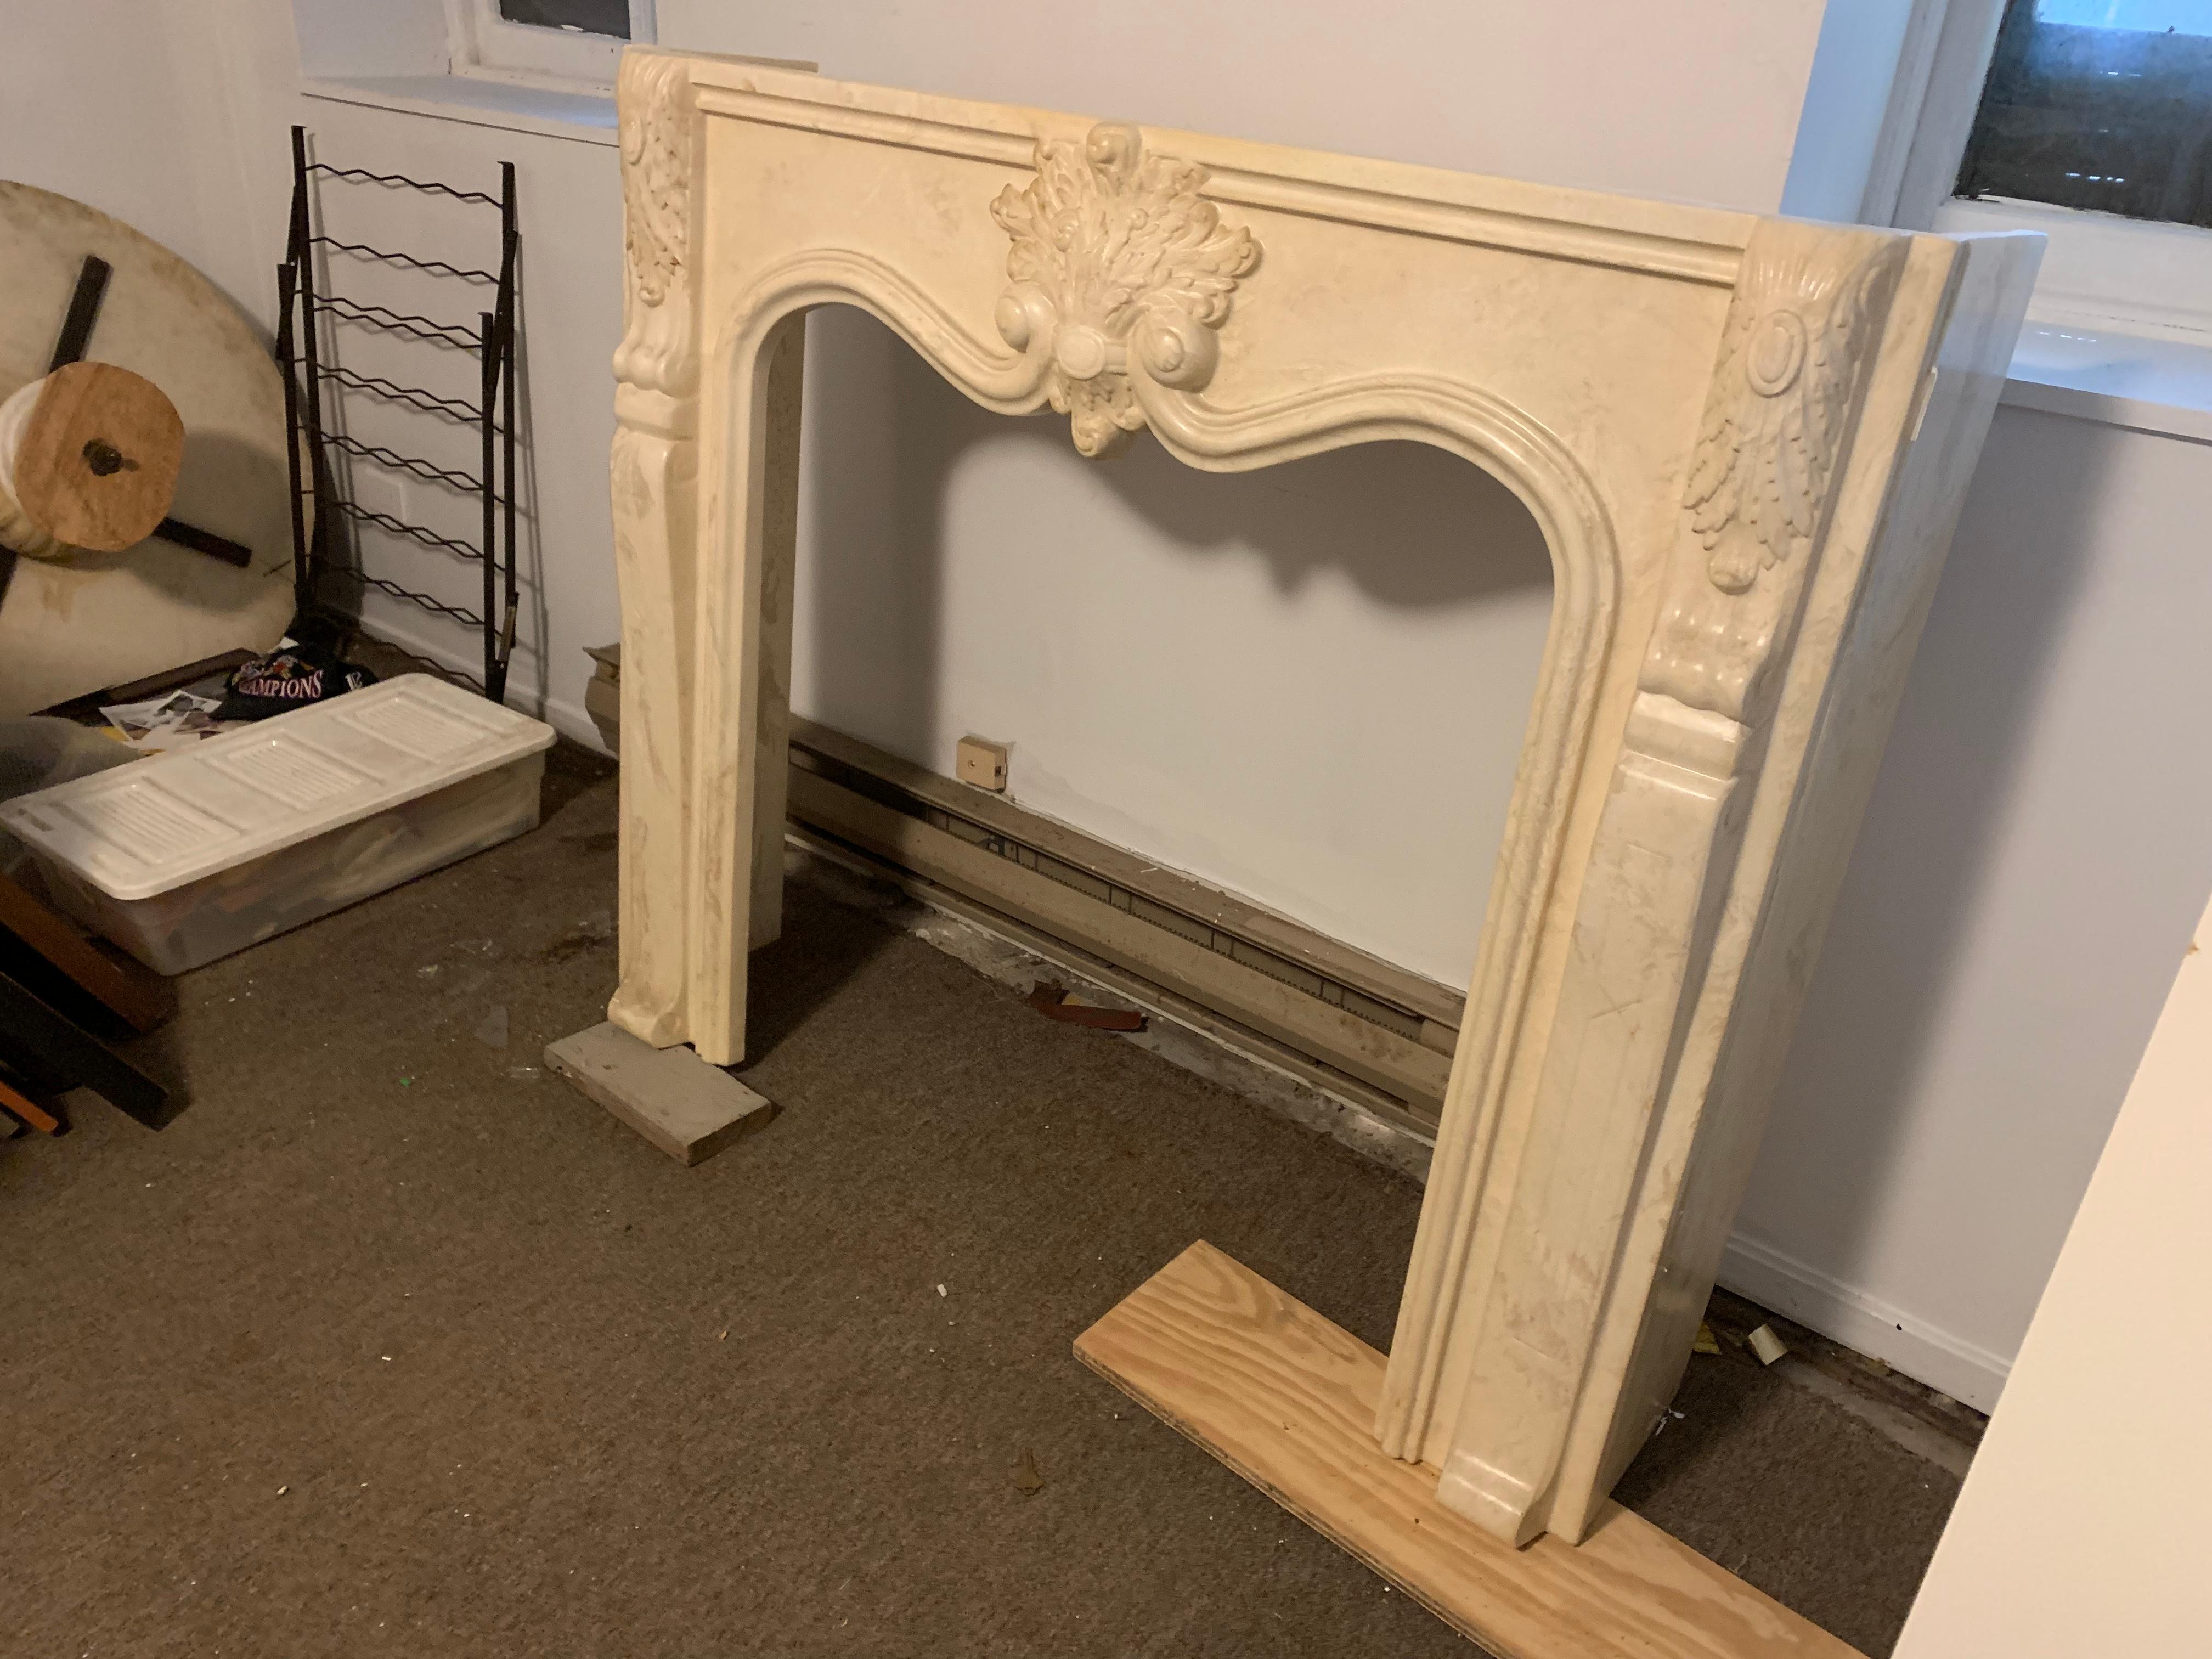 Antique French white marble arched fireplace surround and mantel
White Marble mantel in the Louis XV style with a large central heart and leaf design.
Two pieces, arched base is one piece, top shelf is separate
Well sculpted and beautifully